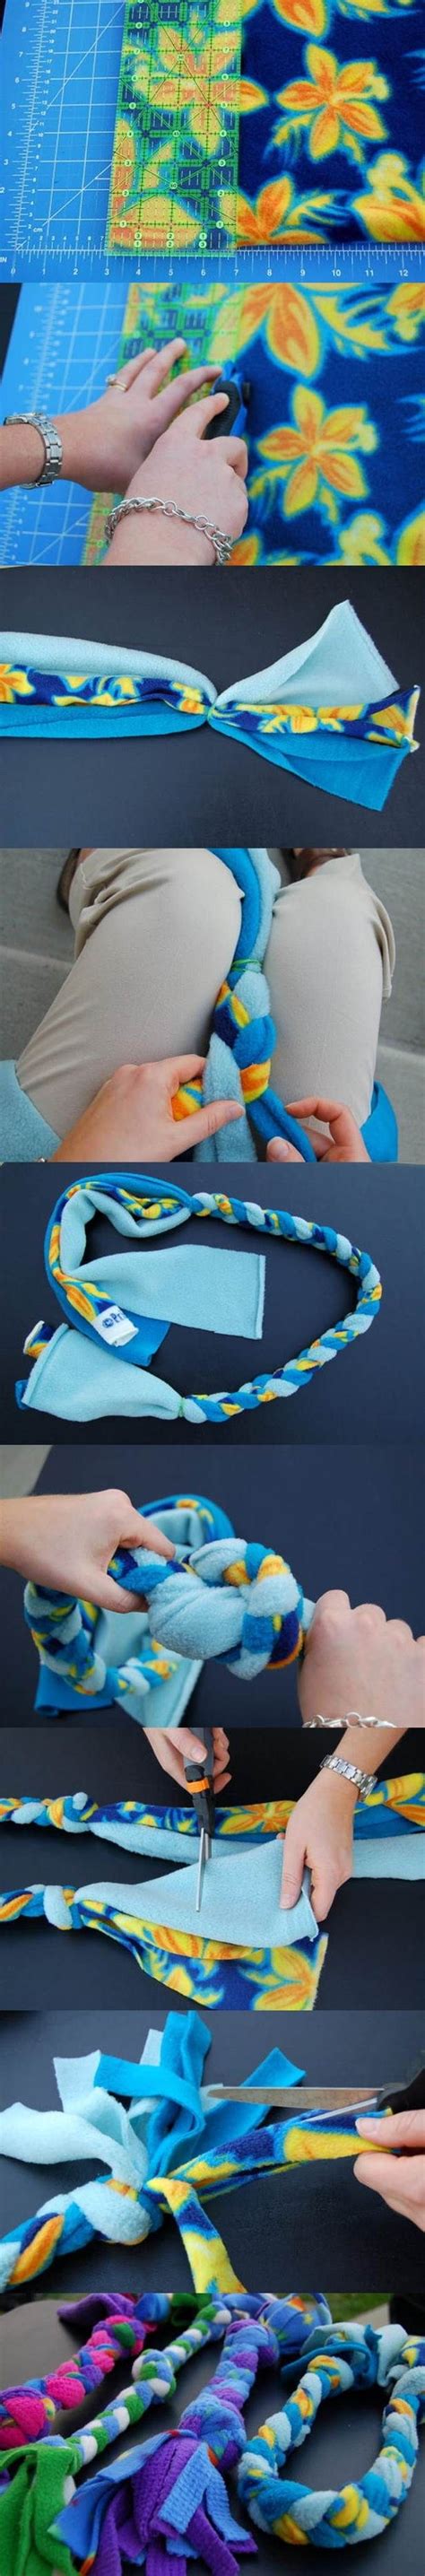 Diy Fleece Rope Dog Toy 2 Has Dimensions I Make These For